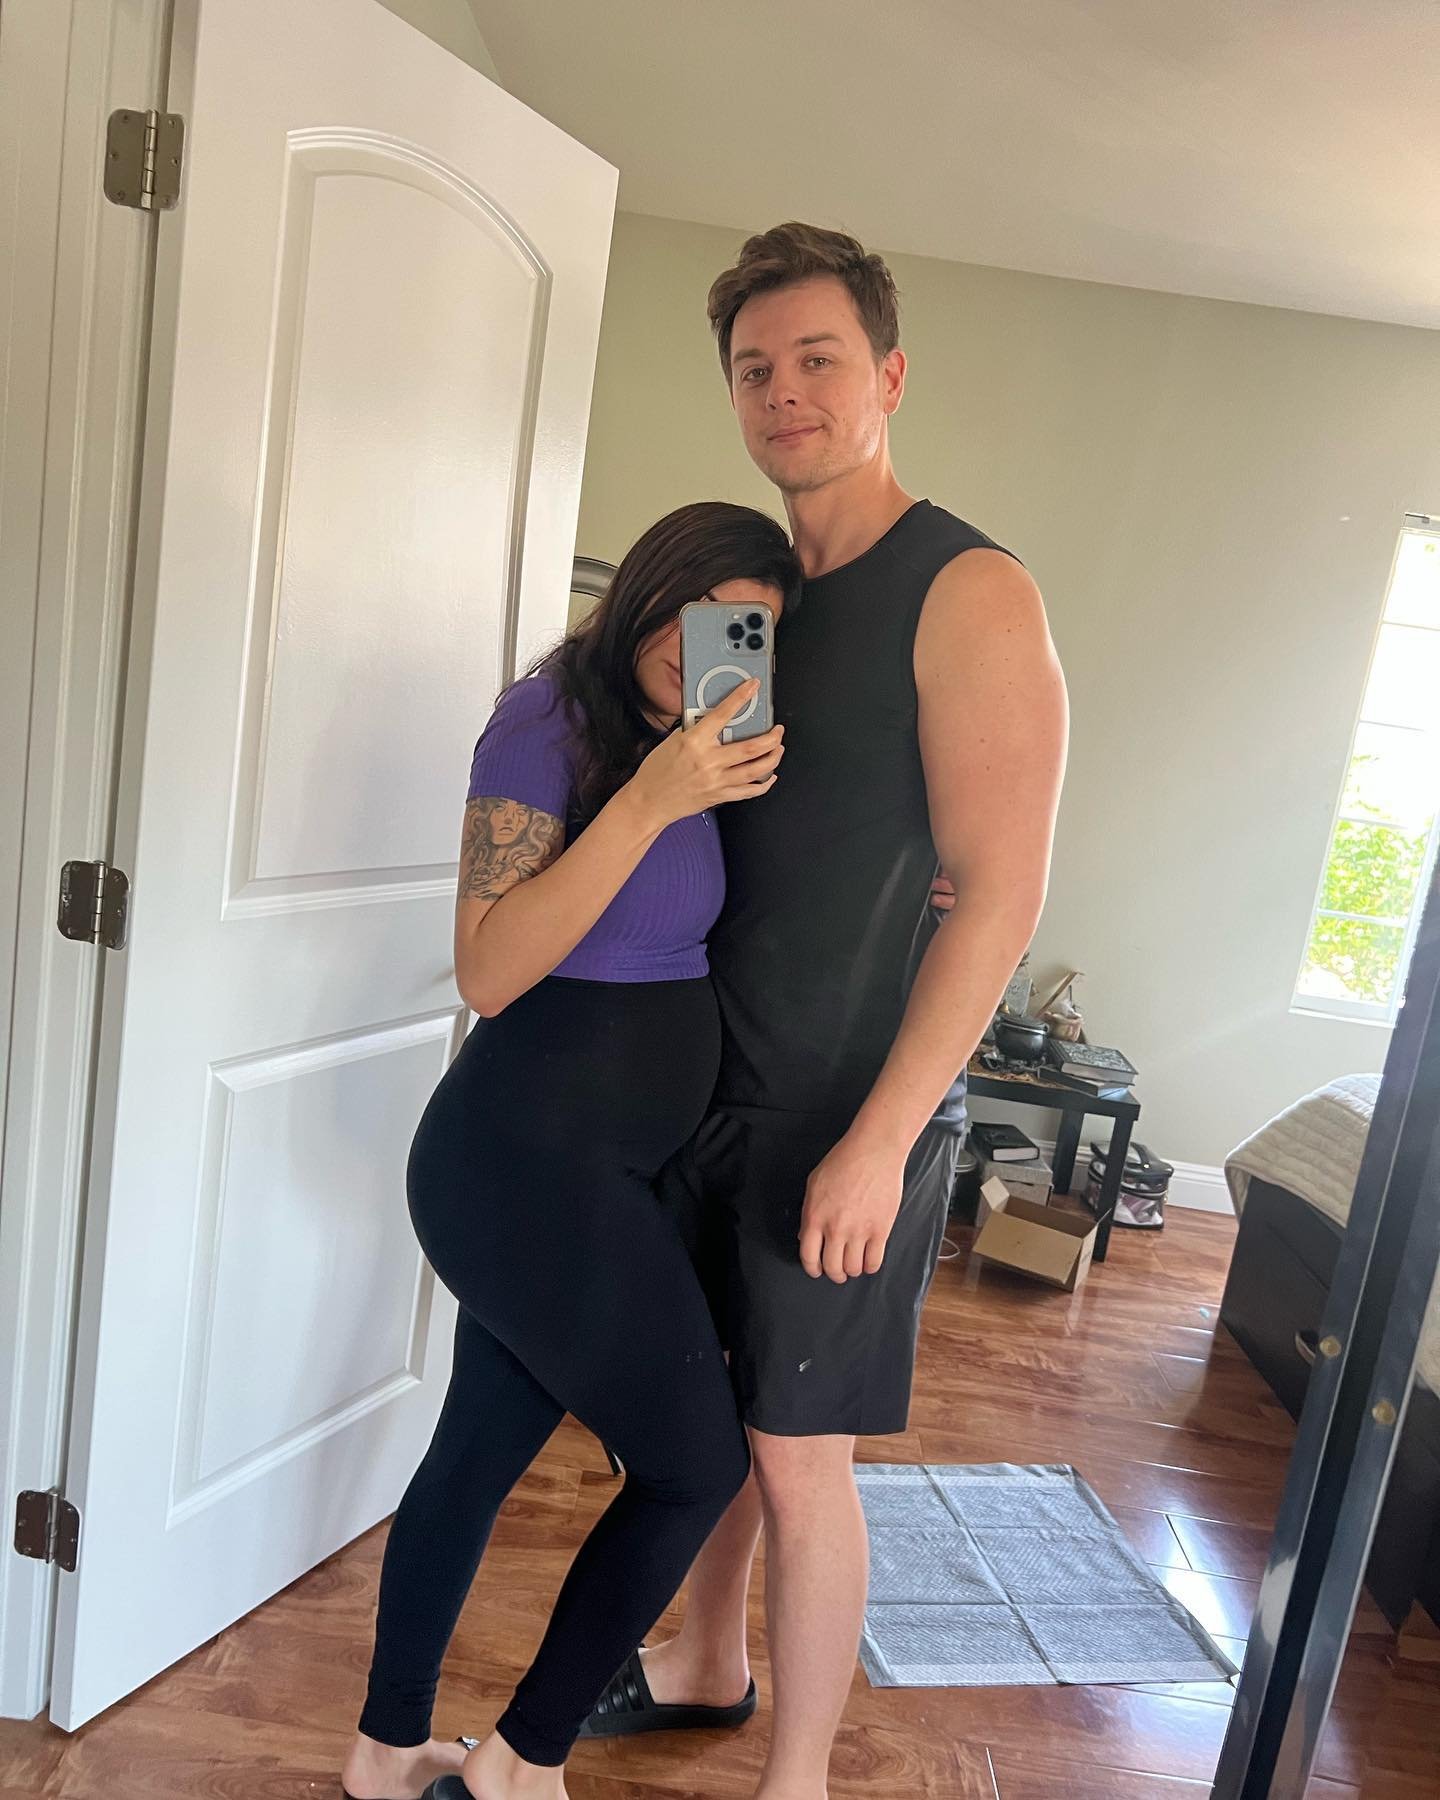 Chad Duell and Luana Lucci